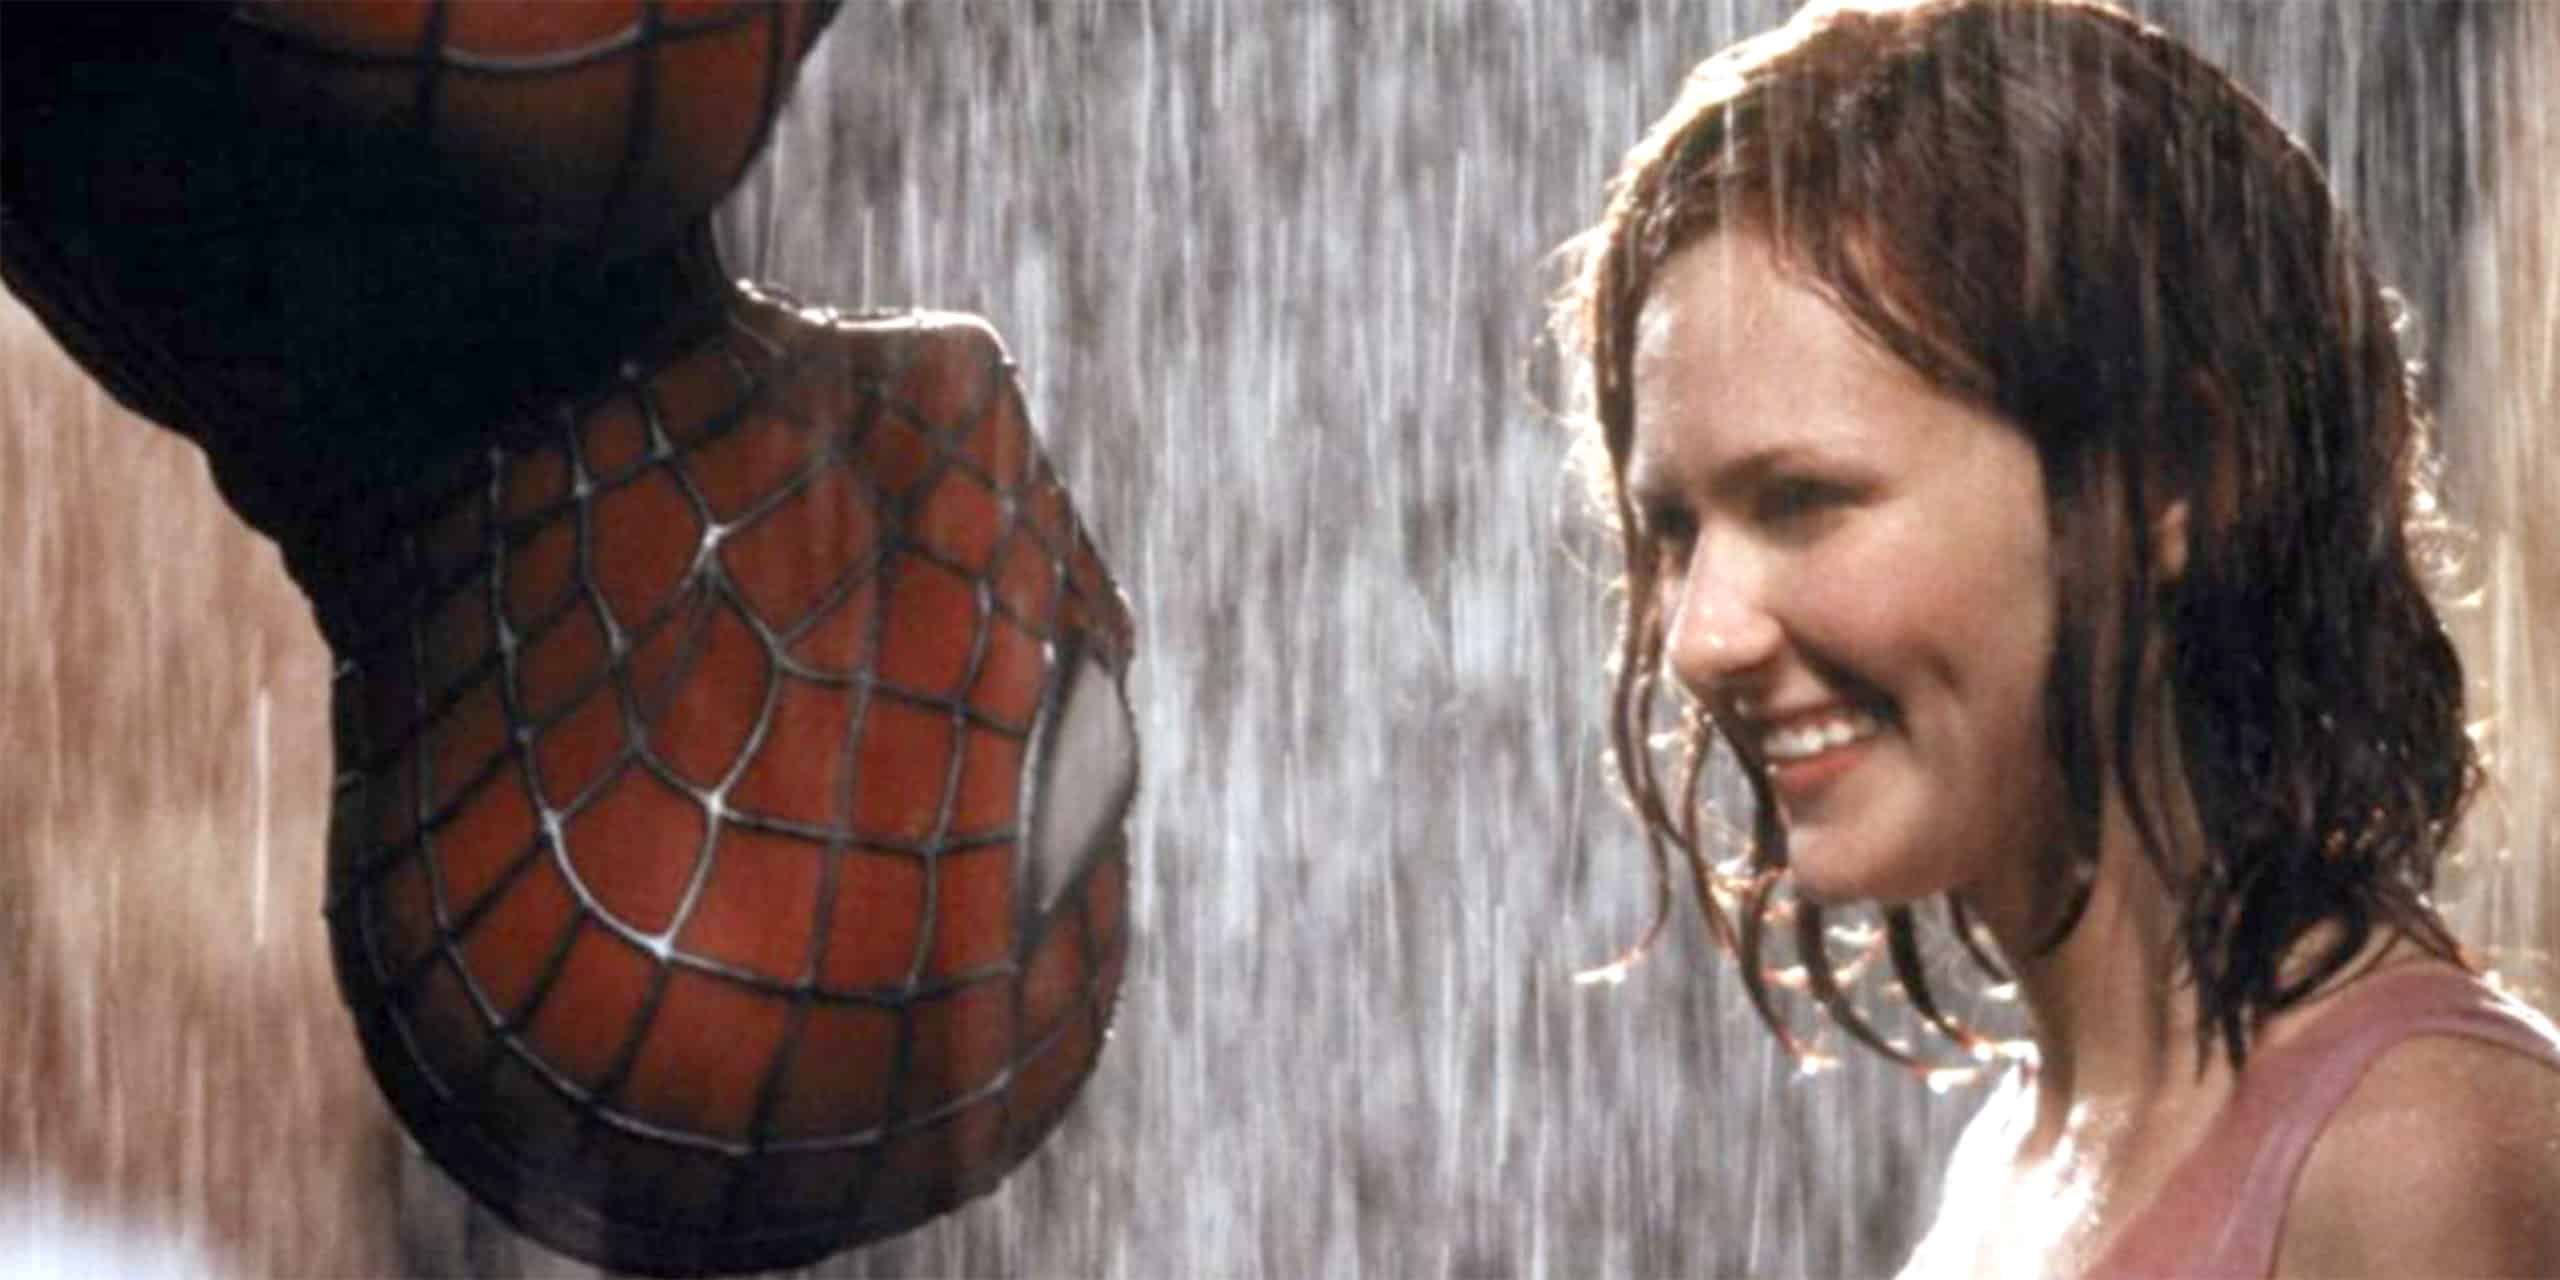 Spider-Man hangs upside-down looking at Mary-Jane, in the rain.